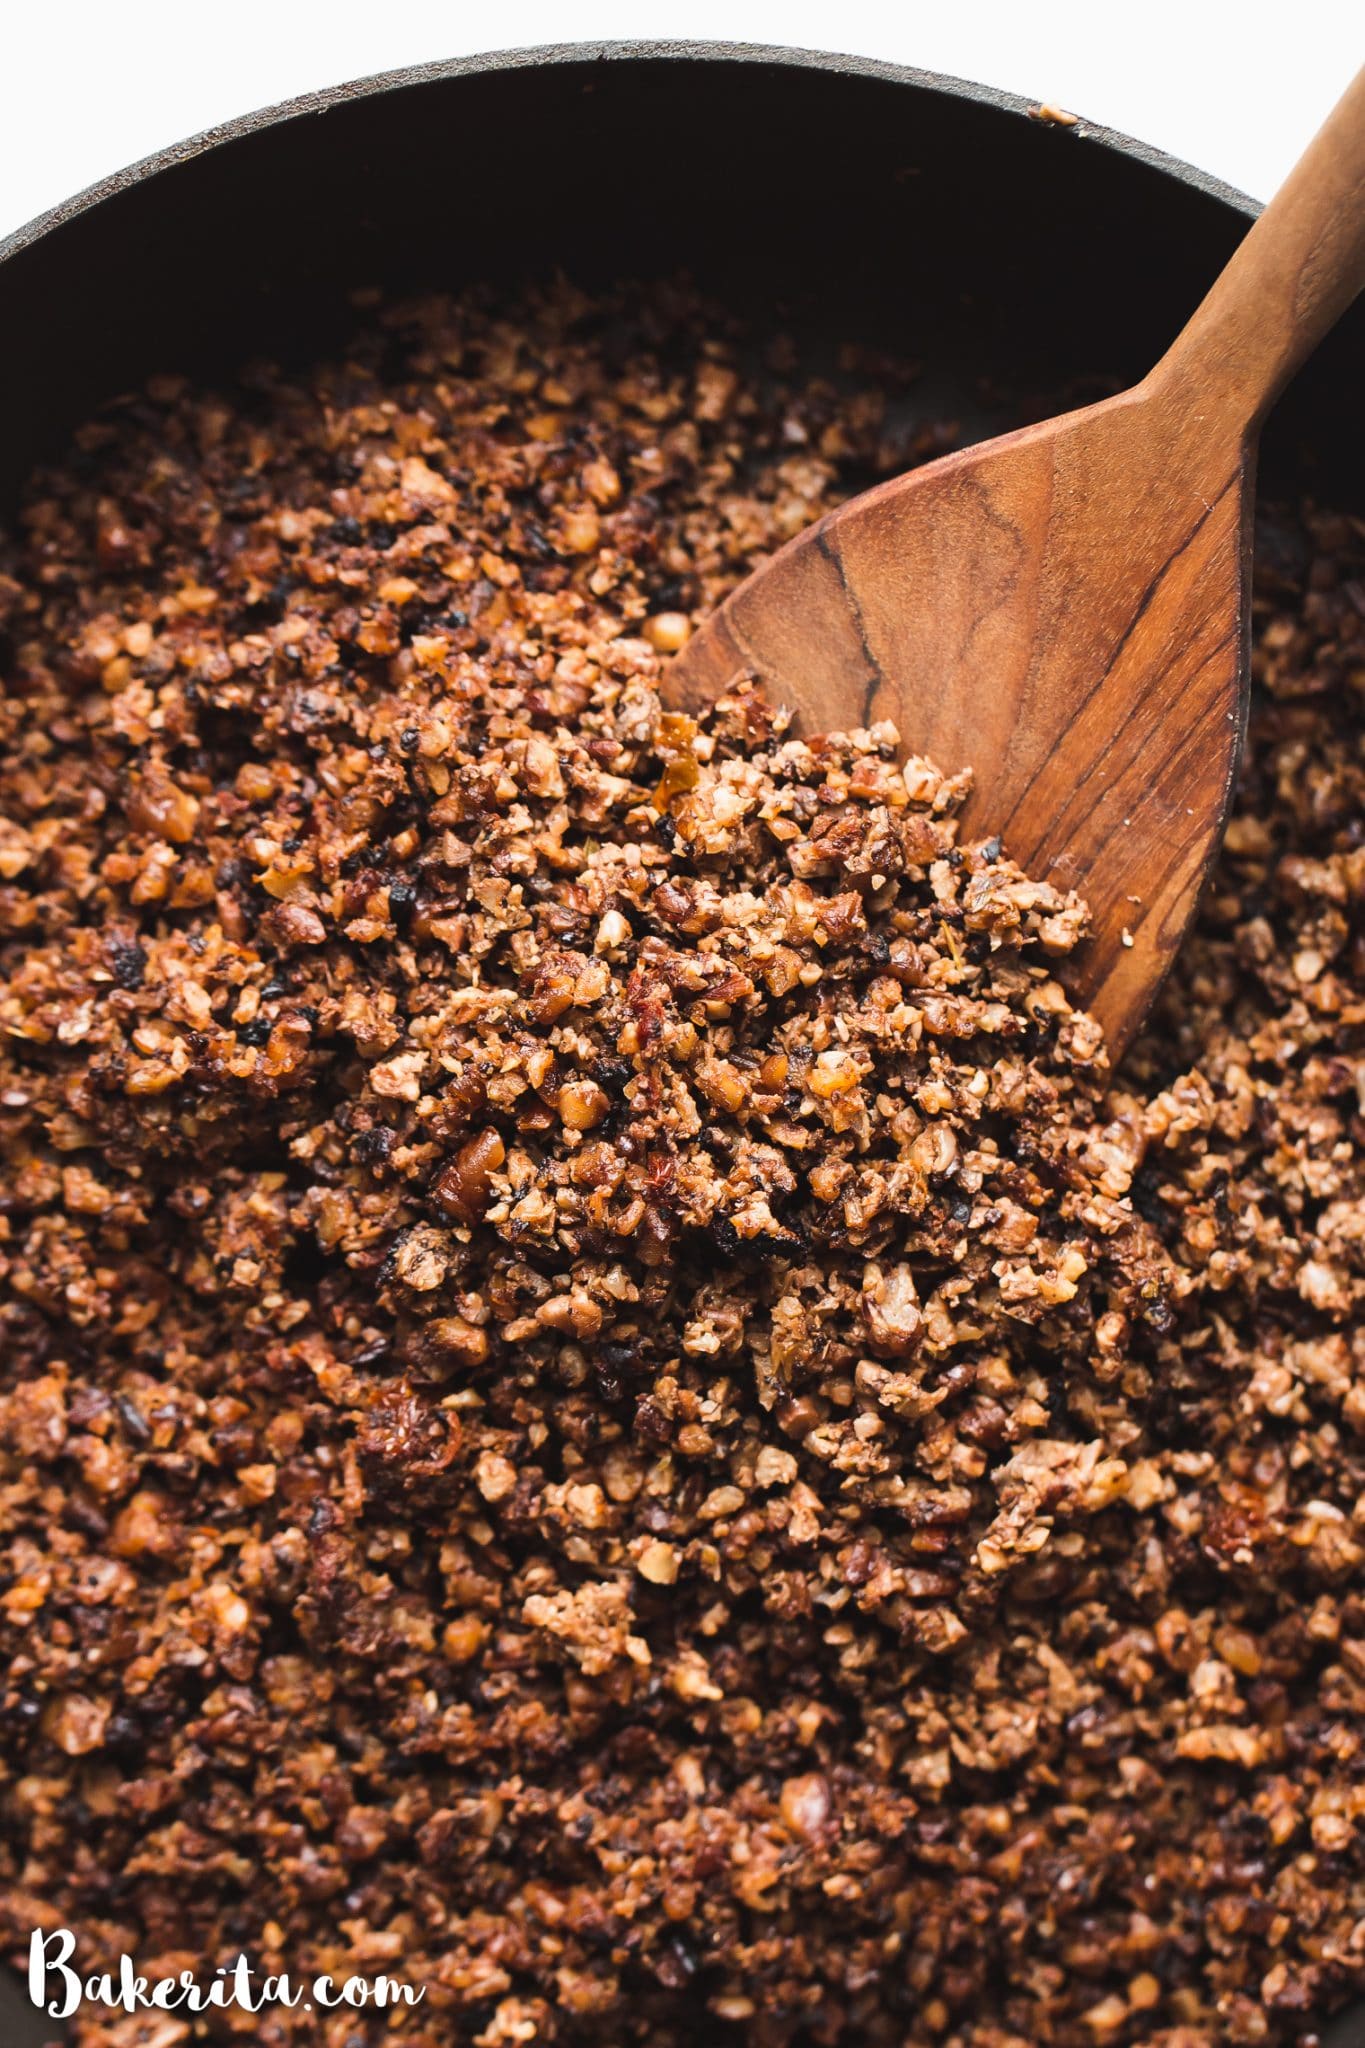 This Vegan Taco Meat recipe is a game-changer! It's made with cauliflower, mushrooms, nuts, and spices. Vegan ground meat filling is in a black cast iron pan with a wooden spoon.